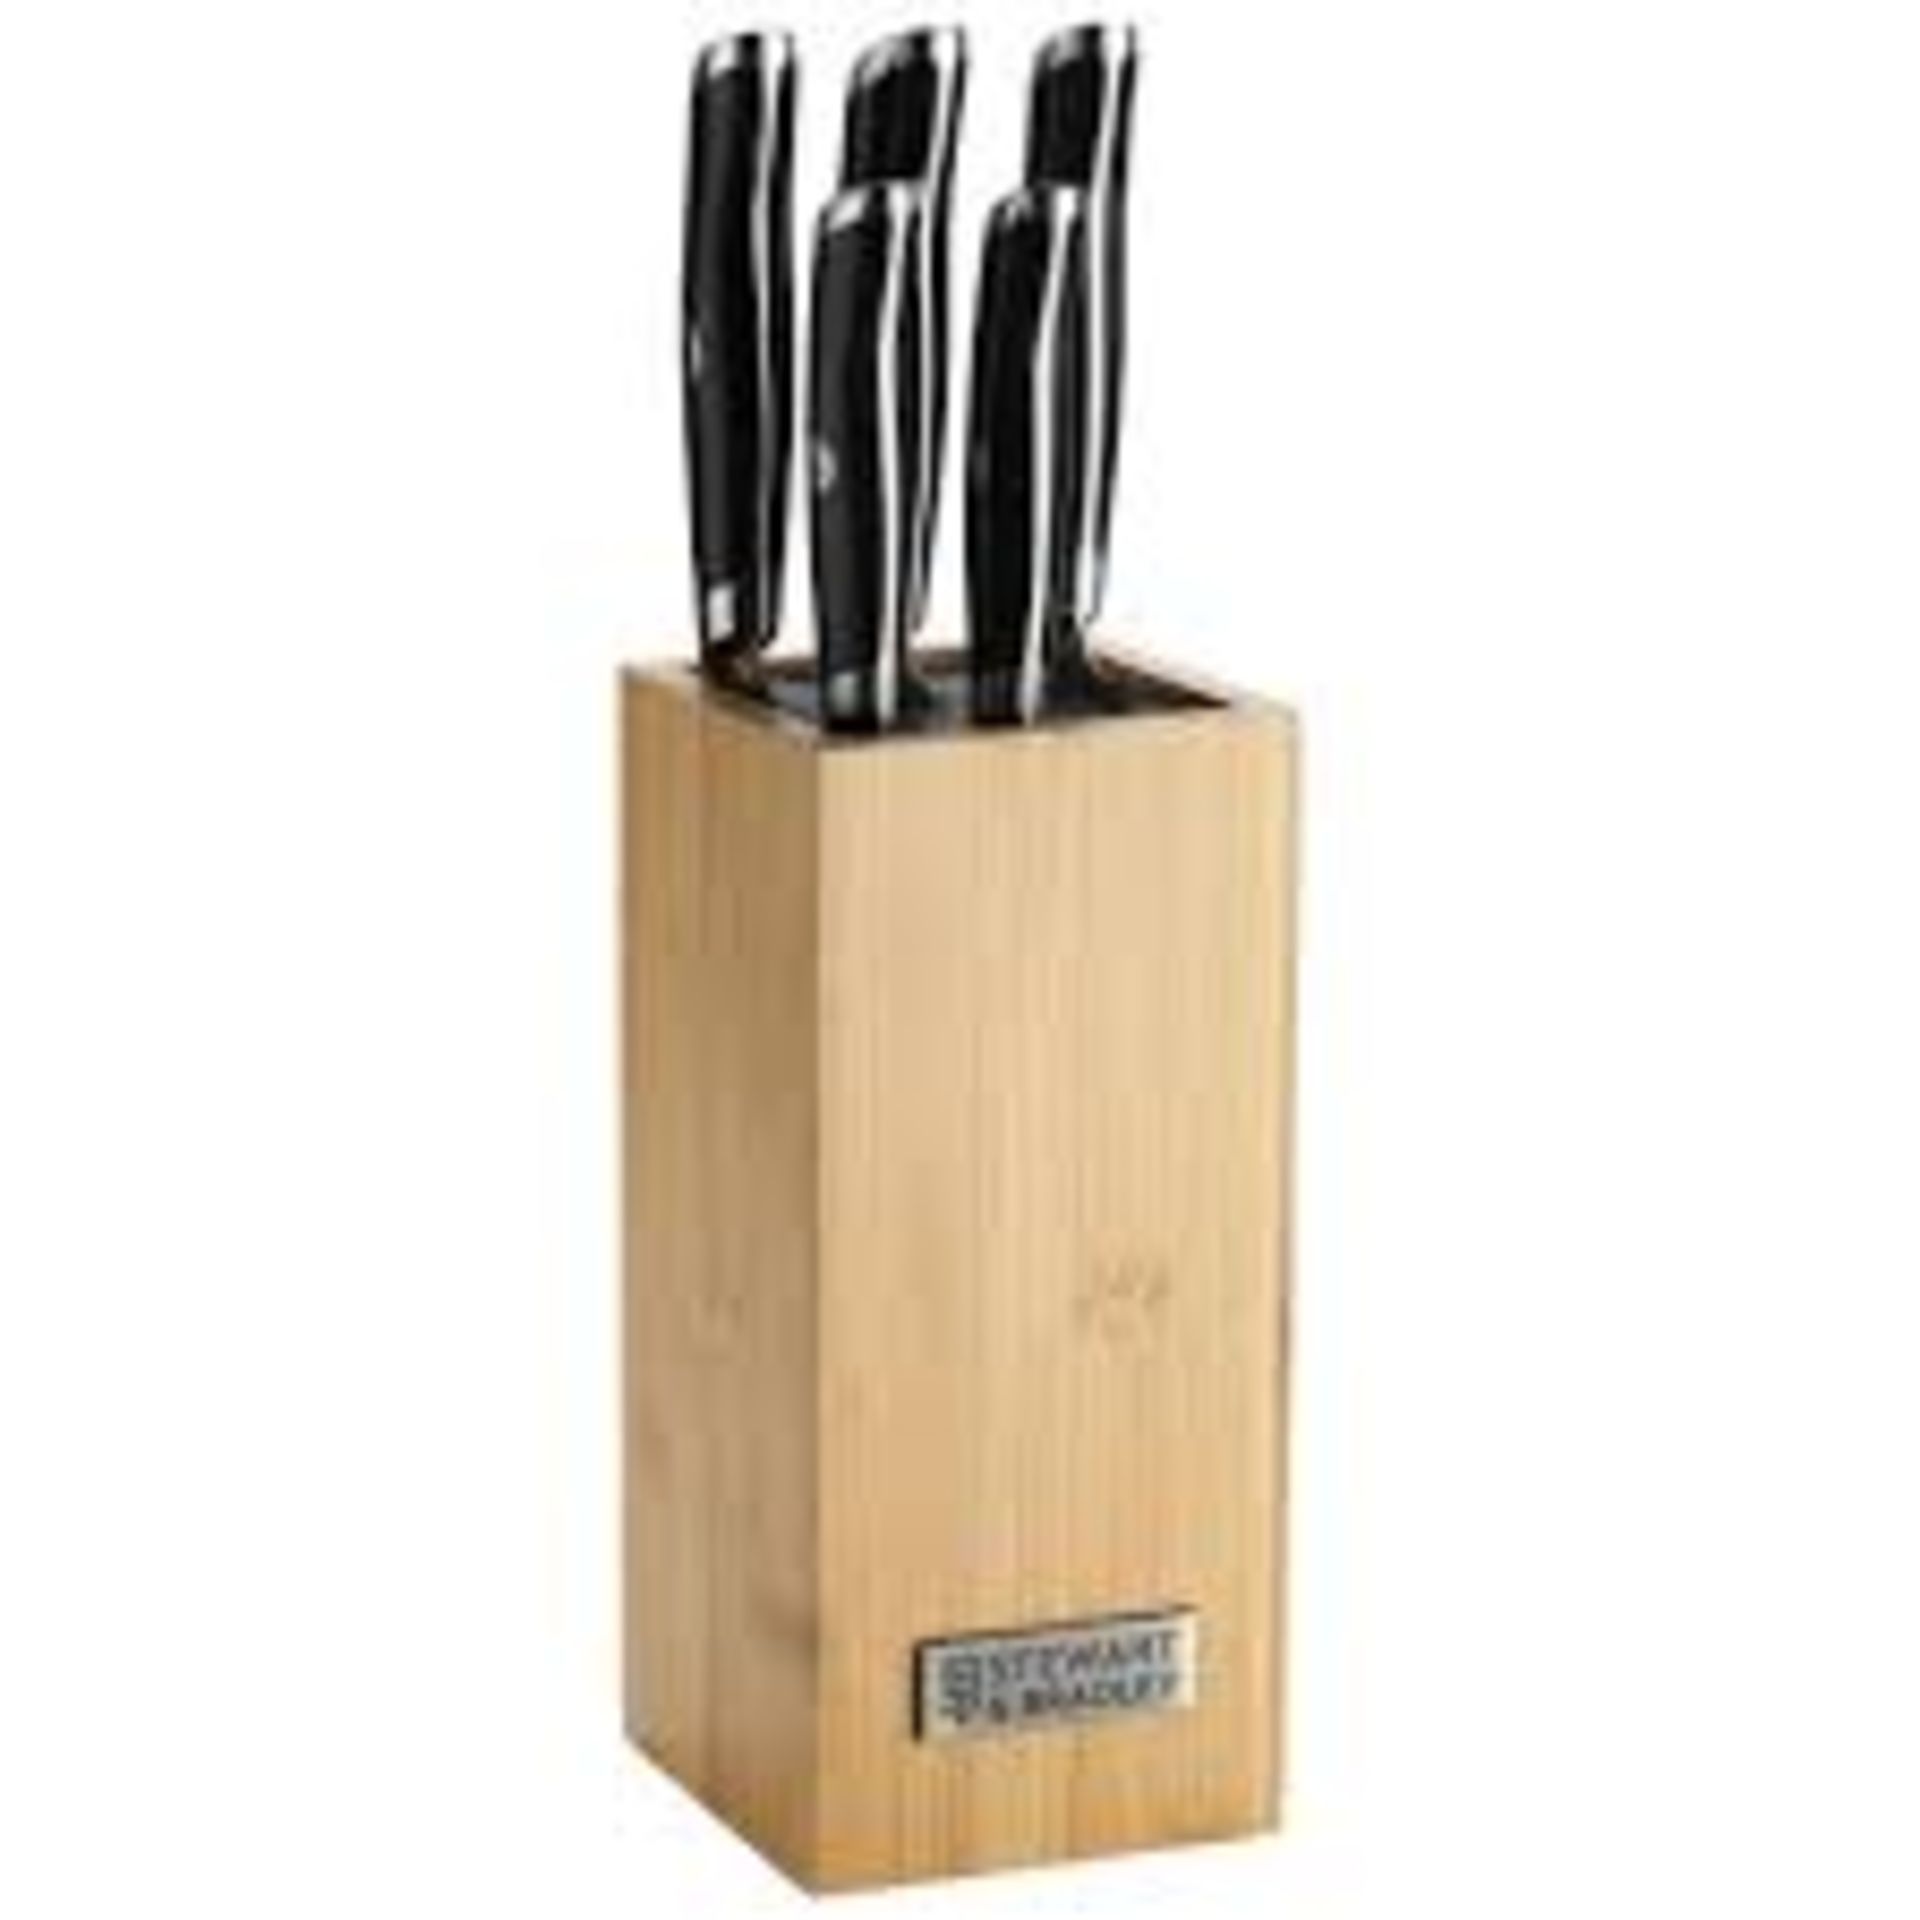 2 X NEW BOXED 5 PIECE HIGH QUALITY KNIFE SETS WITH BAMBOO BLOCK (REF1000304ROW13)